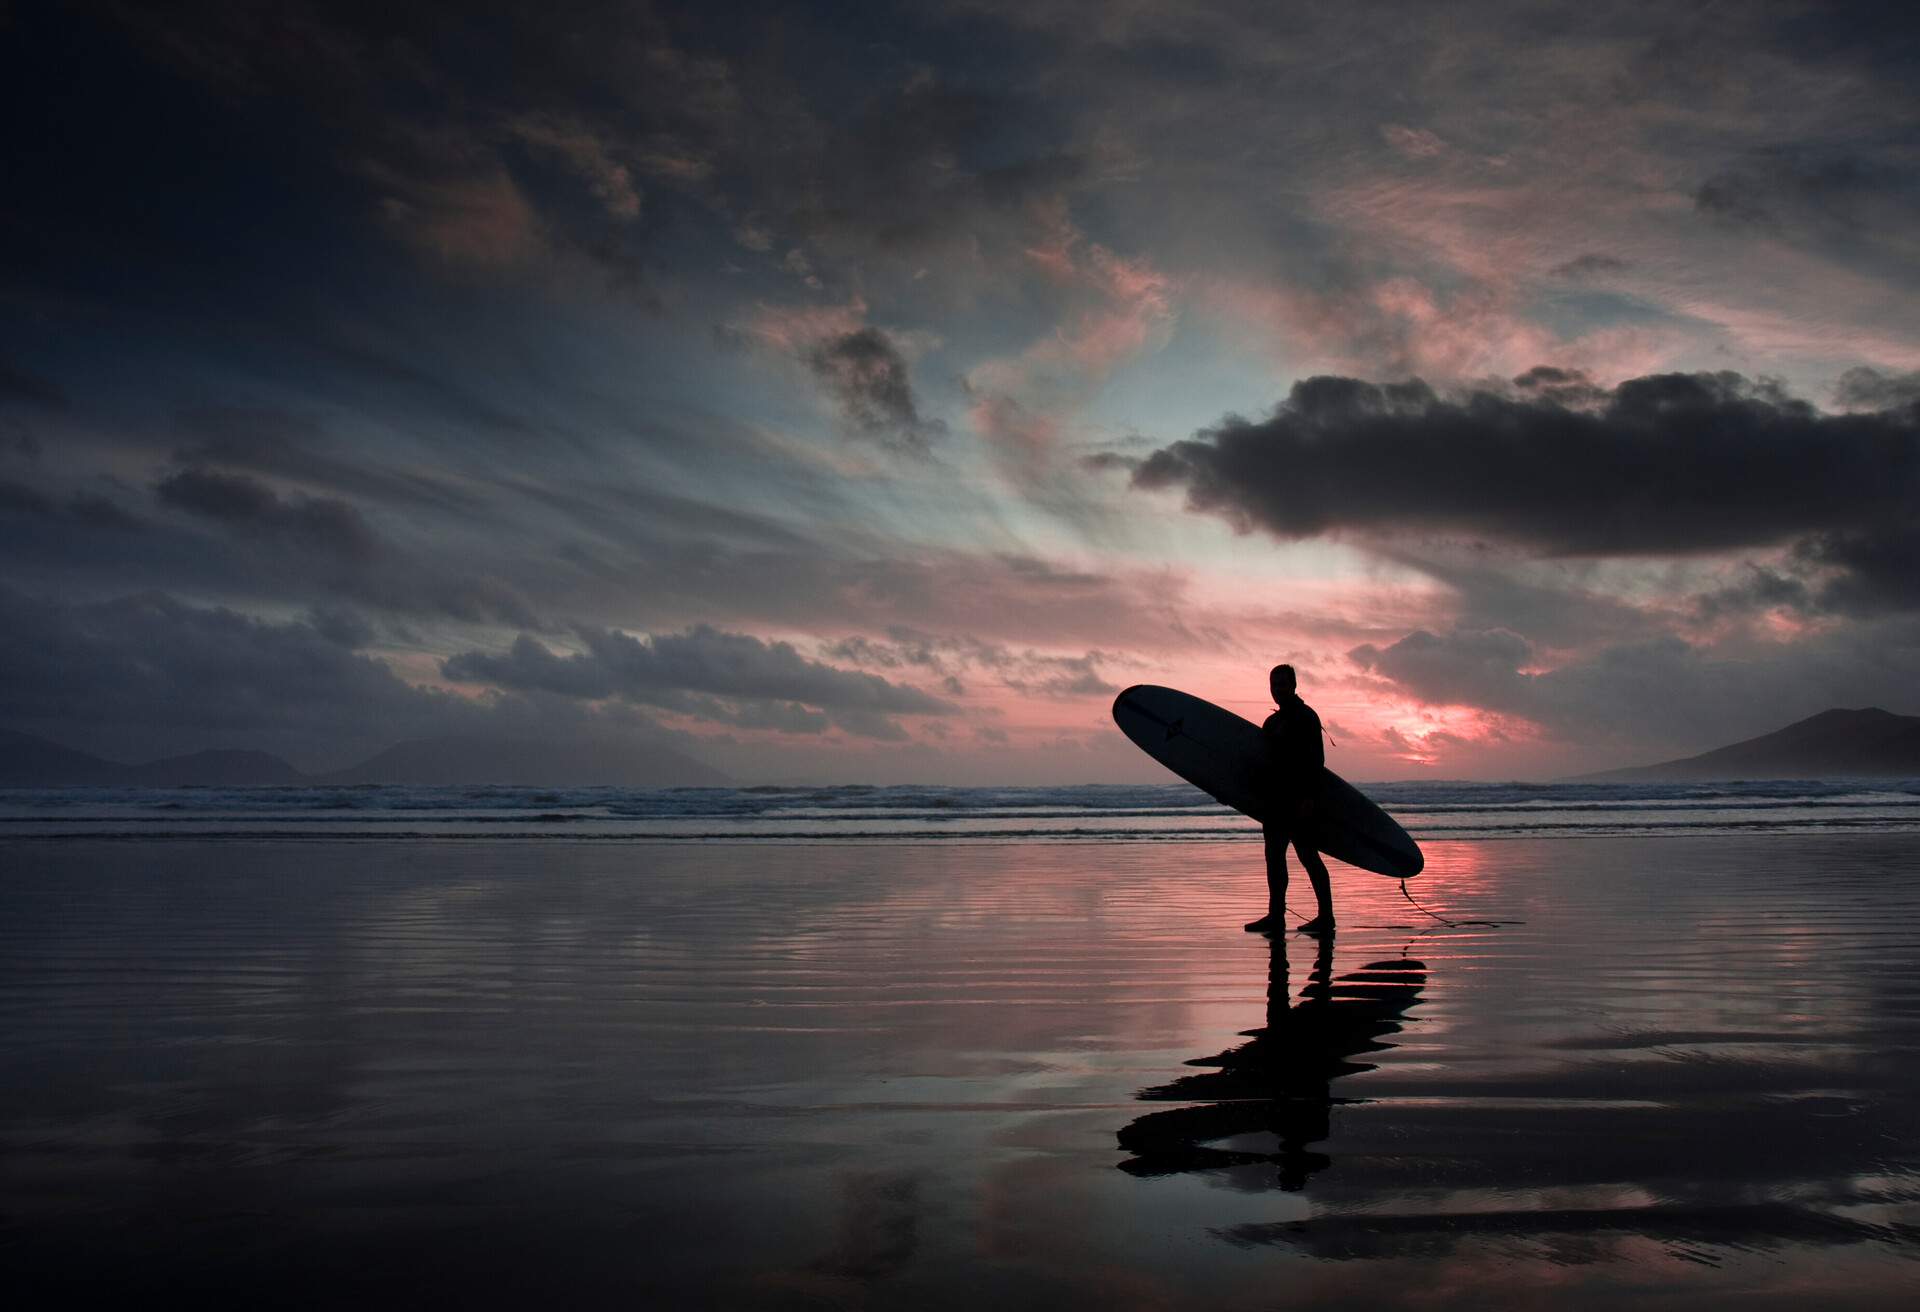 DEST_IRELAND_KERRY_BEACH_THEME_PEOPLE_MA_SURFER_SUNSET_GettyImages-98176941